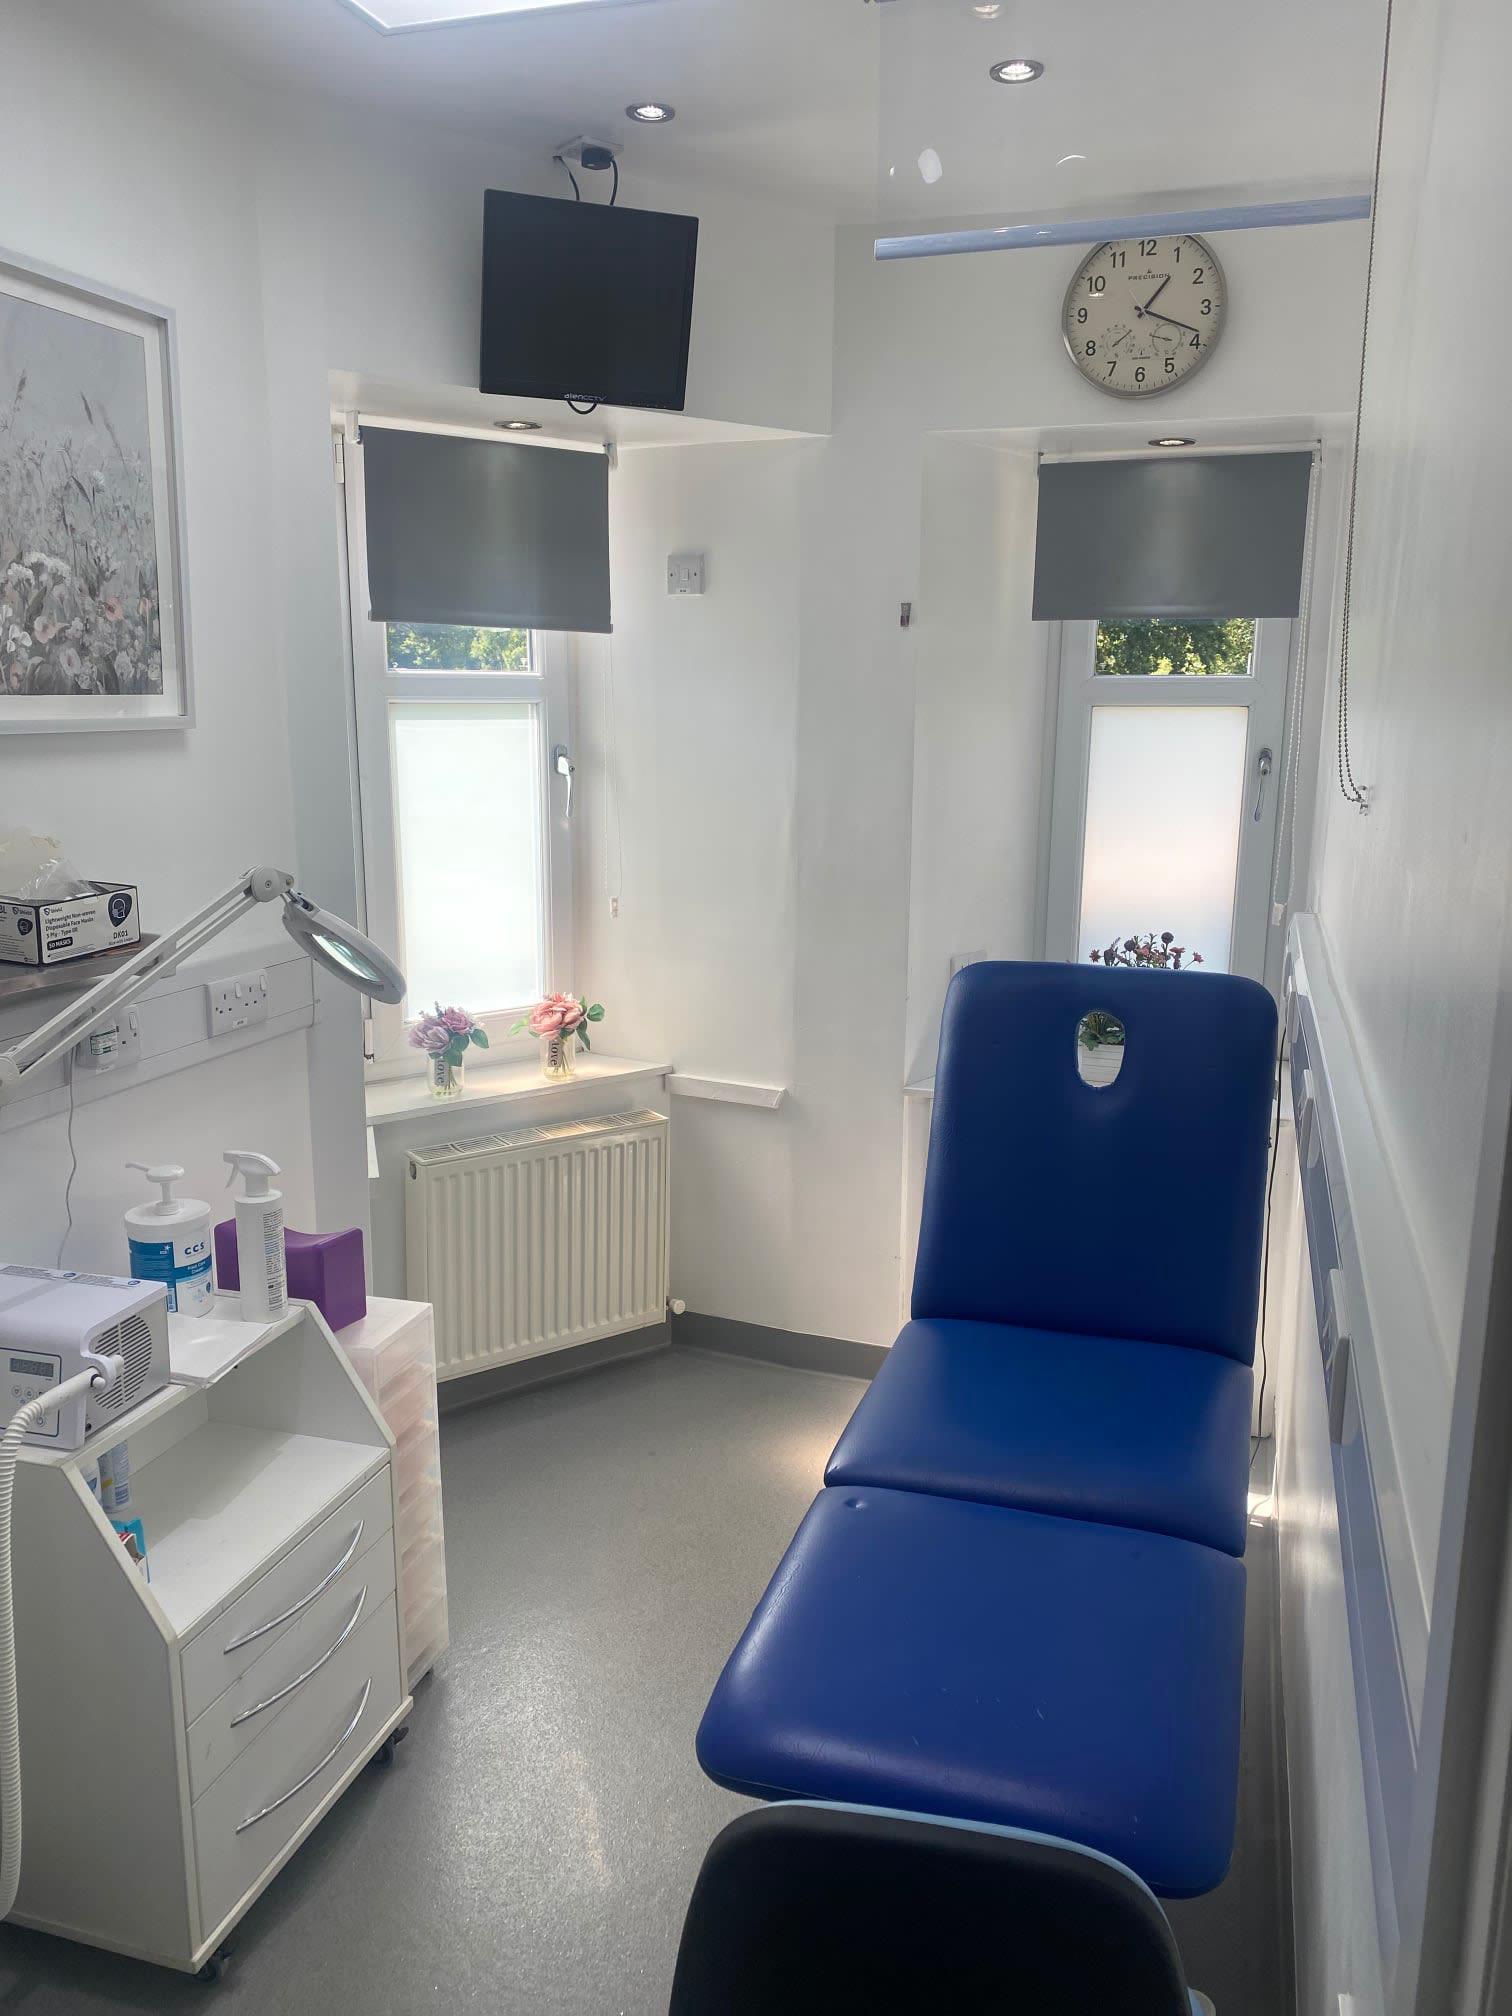 The Foot Place Glasgow 01355 227226